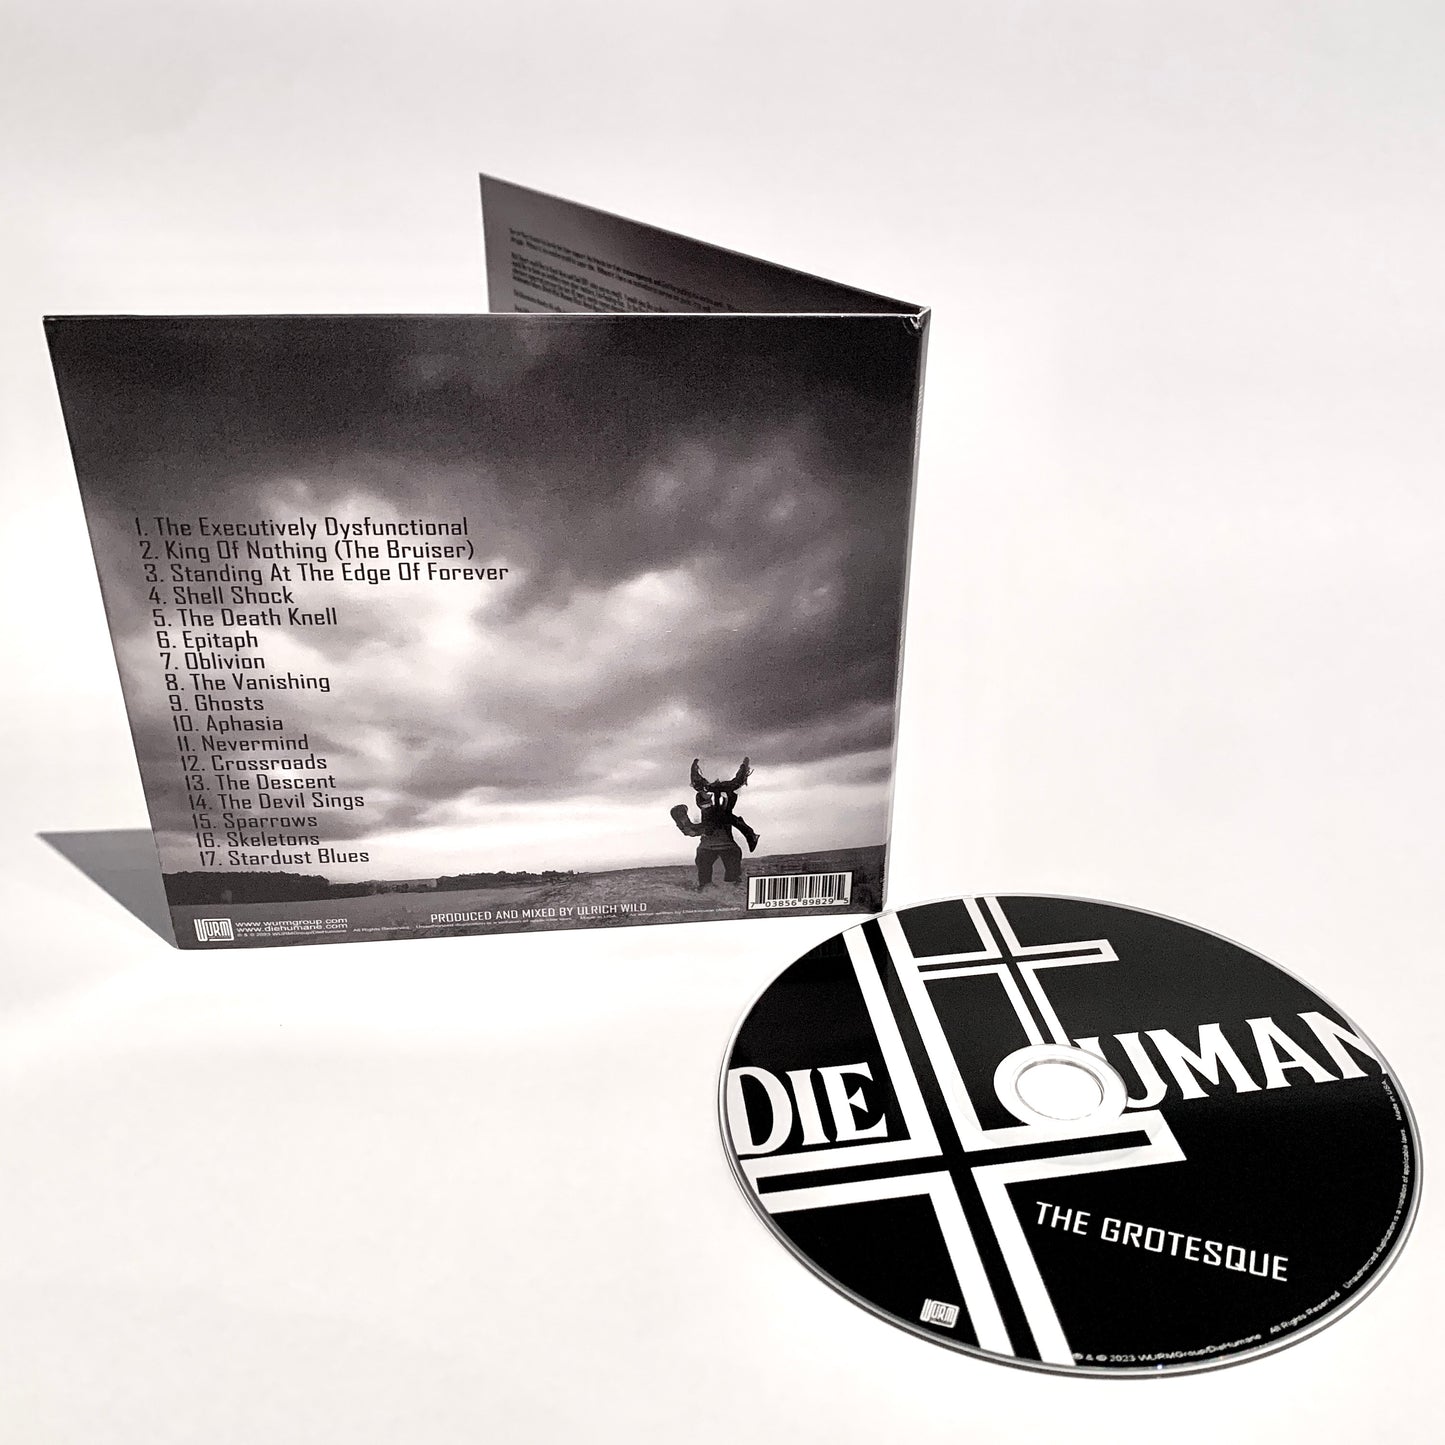 DieHumane - The Grotesque CD with back cover